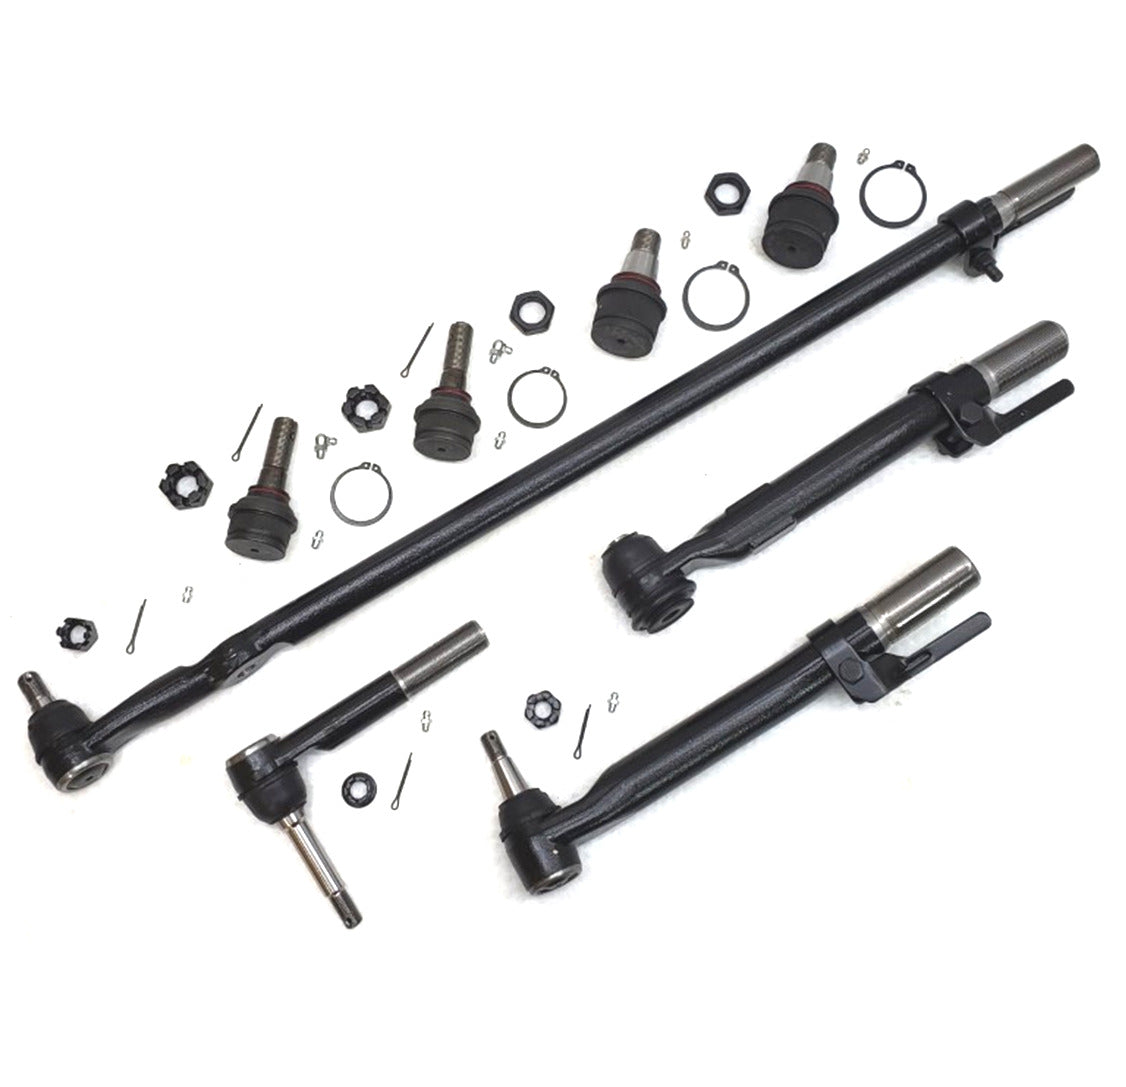 XRF Ball Joint Tie Rod Drag Link Steering Kit for 2005-2007 Ford F250, F350 Super Duty 4x4